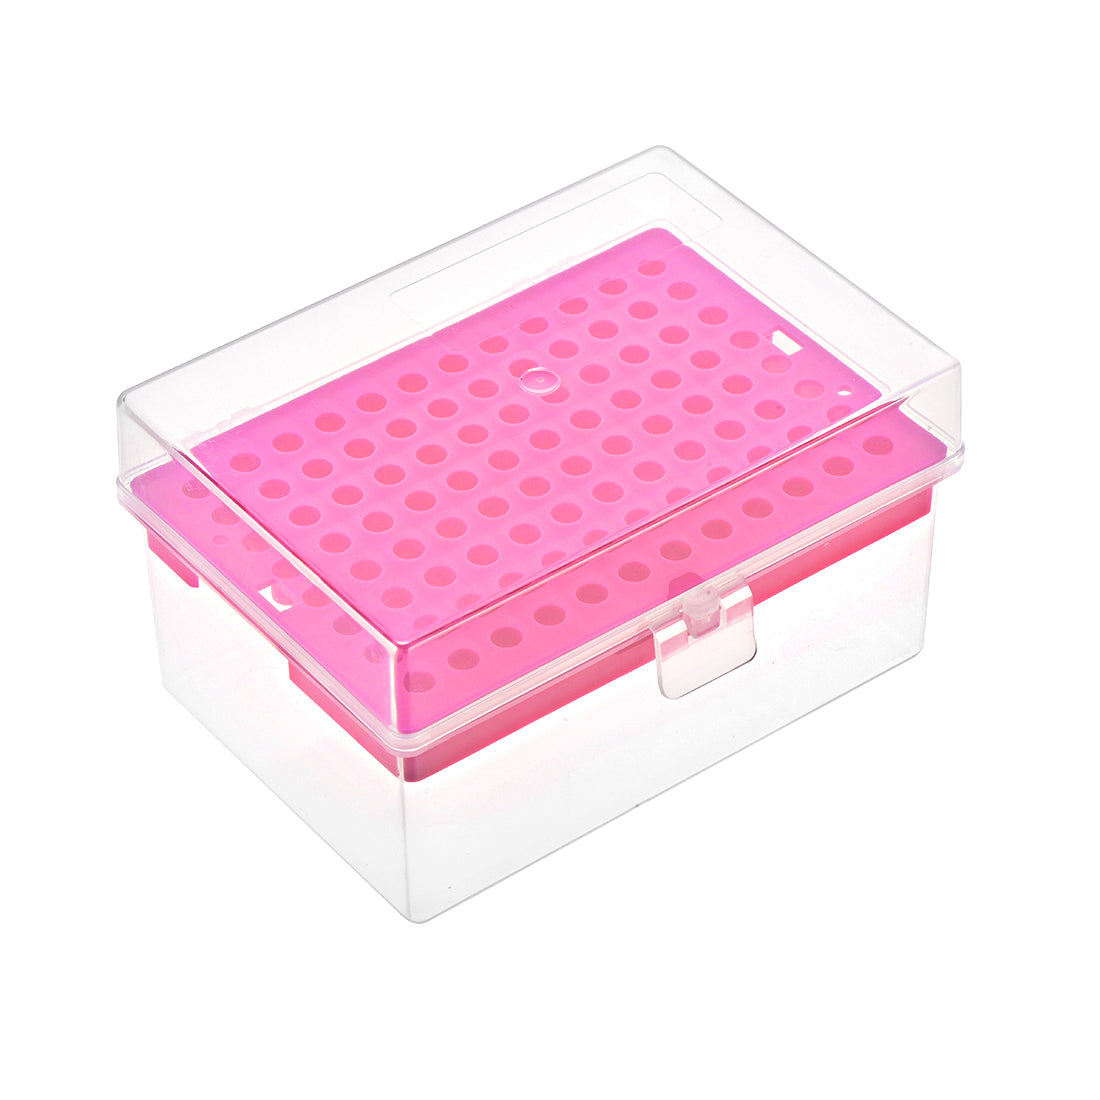 uxcell Uxcell Pipette Tips Box 96-Well Polypropylene Tip Holder Container for 200ul Pipettor 5mm Hole Diameter Red